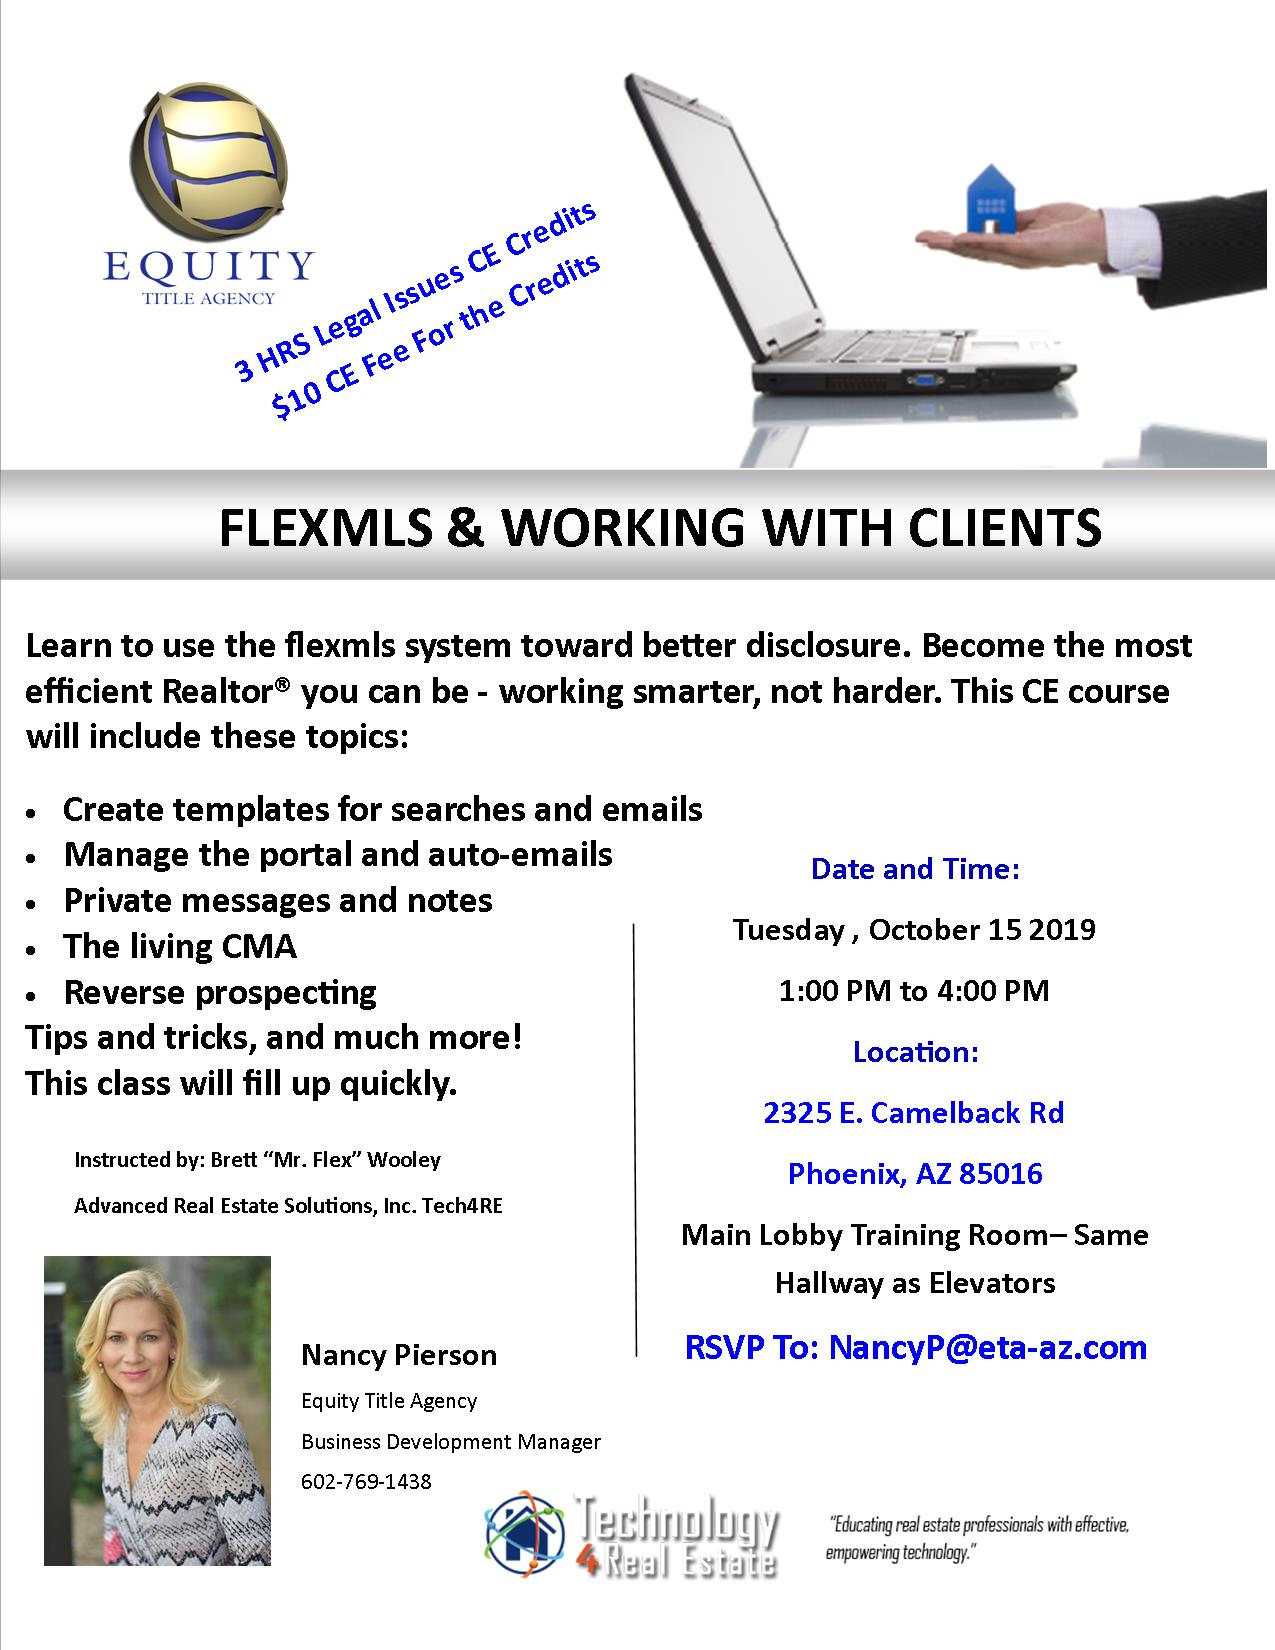 FLEXmls and working with clients